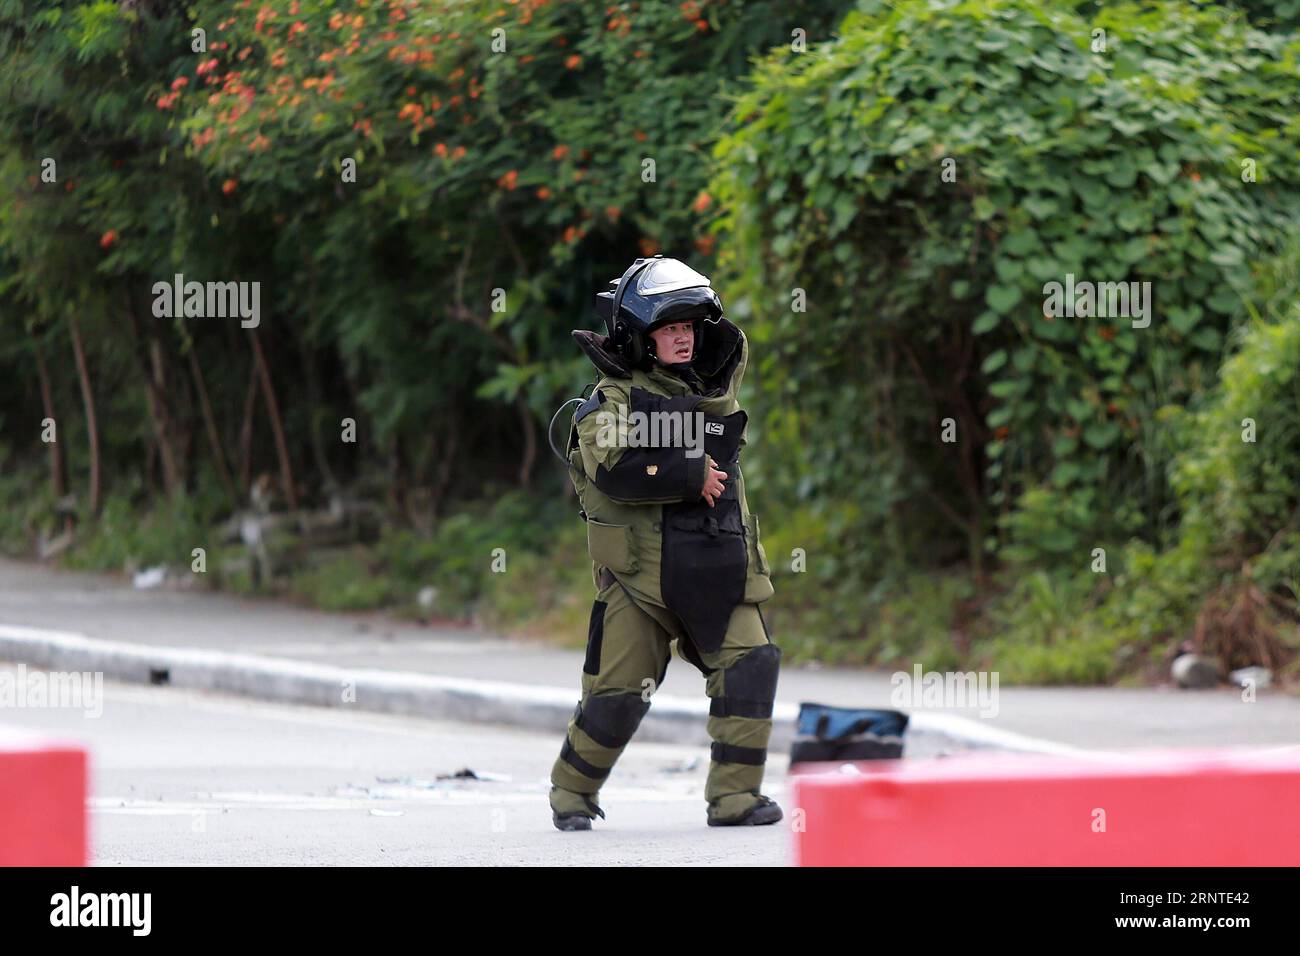 (171107) -- PASAY CITY, Nov. 7, 2017 -- A member of the Philippine National Police Explosive Ordnance Division (PNP-EOD) wearing a bomb suit conducts a bomb disposal scenario to show their preparation for the security in the upcoming 31st Association of Southeast Asian Nations (ASEAN) Summit in Pasay City, the Philippines, on Nov. 7, 2017. )(axy) PHILIPPINES-PASAY CITY-ASEAN-BOMB DISPOSAL SCENARIO ROUELLExUMALI PUBLICATIONxNOTxINxCHN Stock Photo